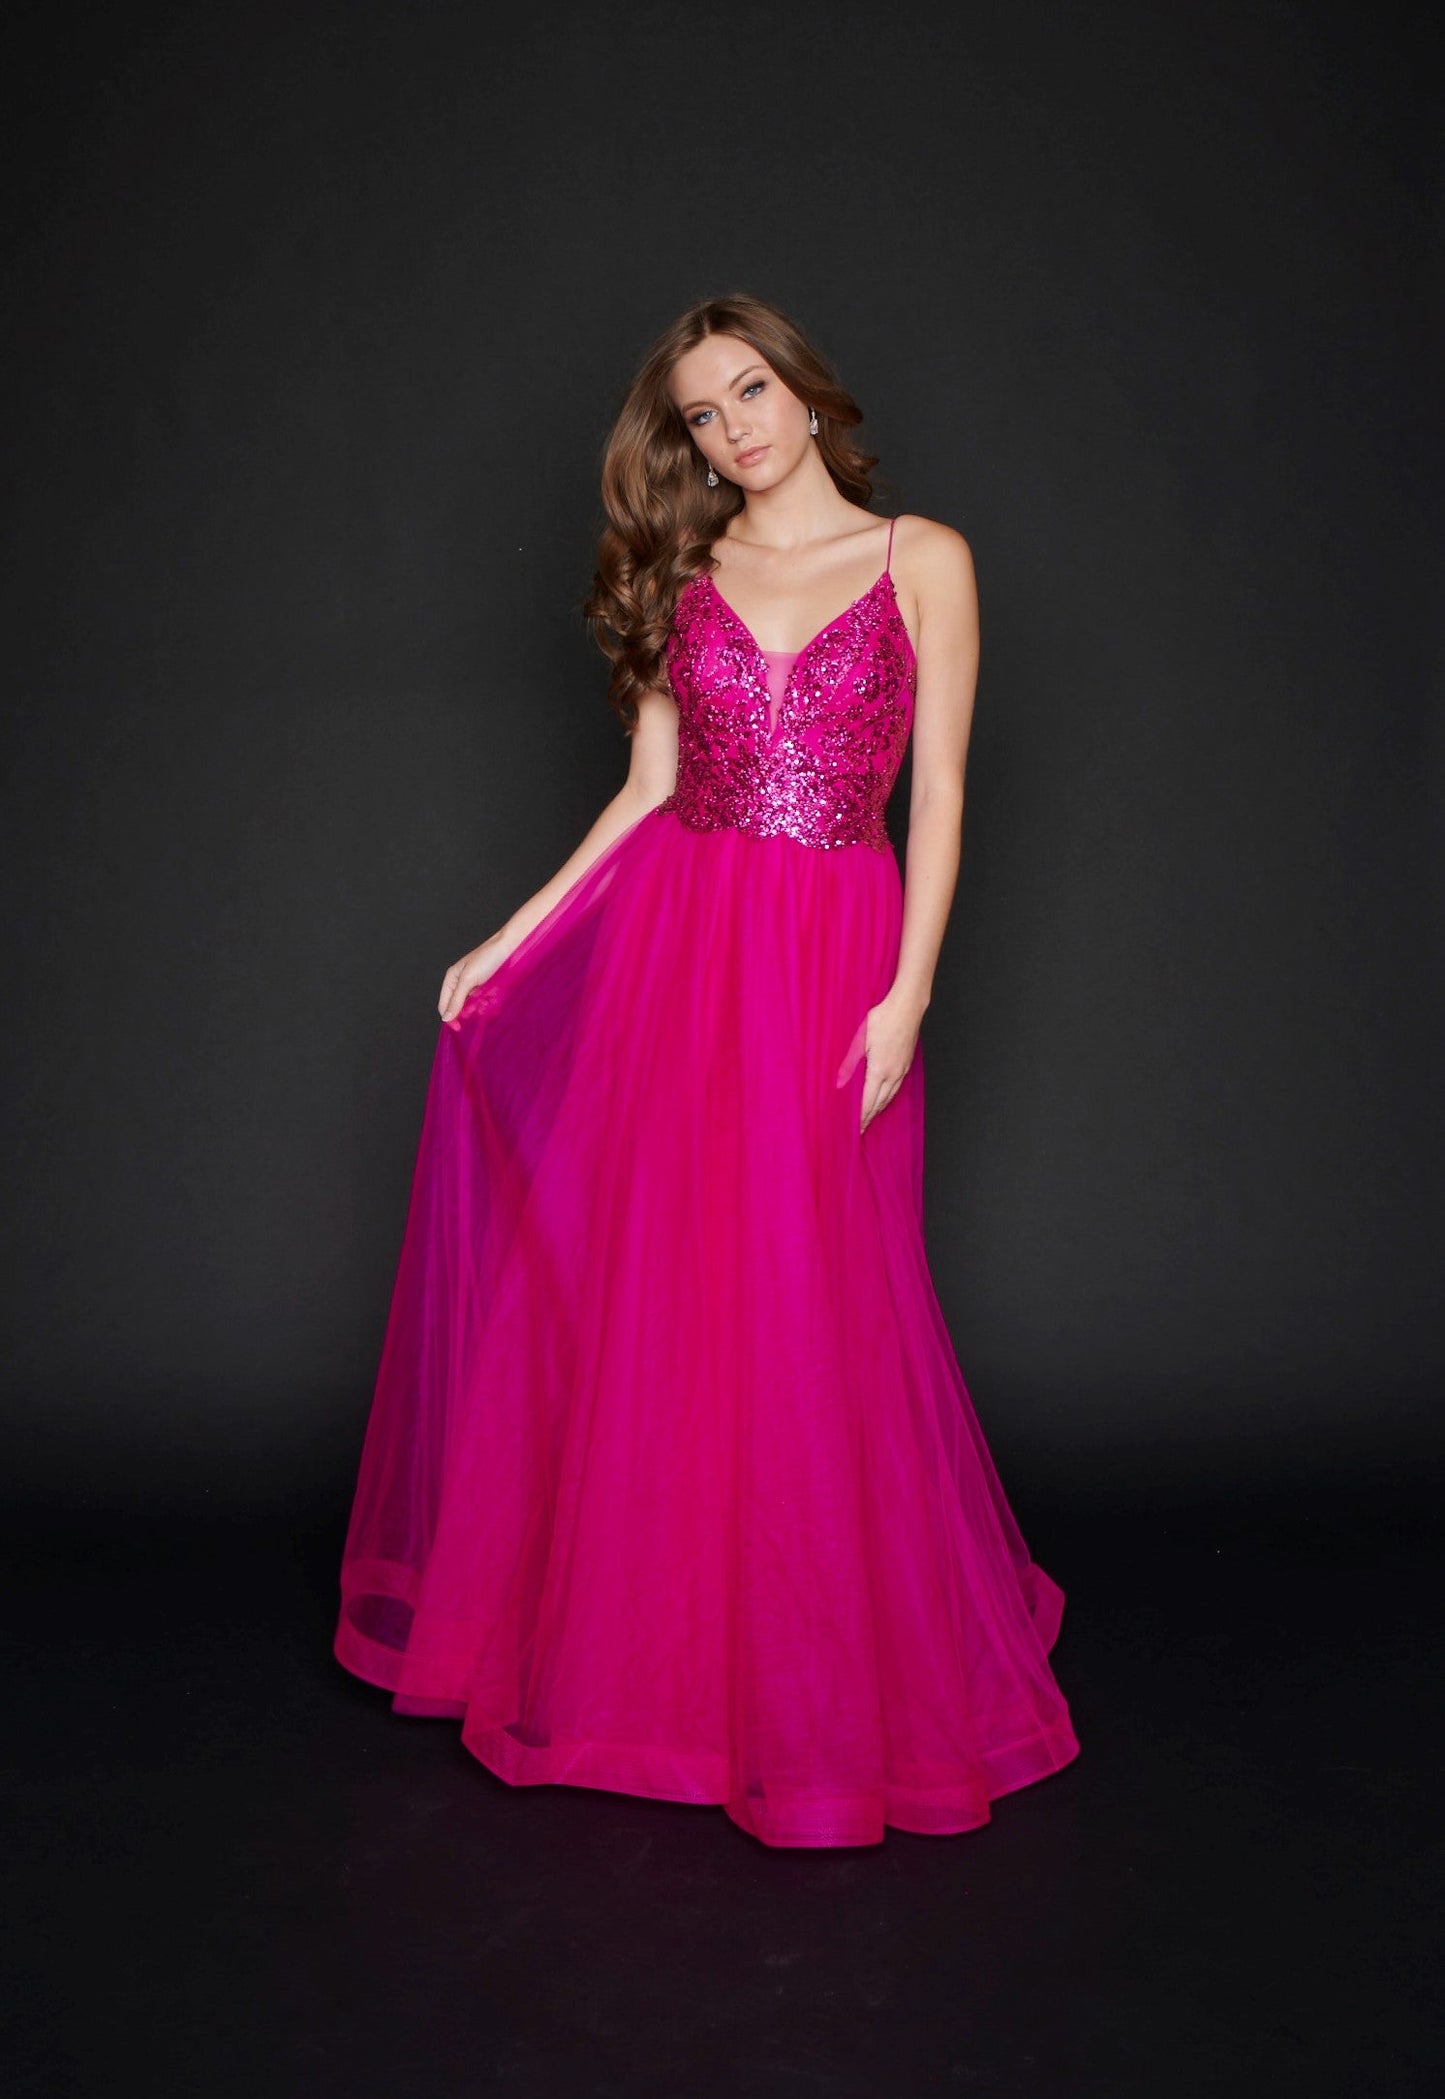 Nina Canacci 1522 Long V neck Pageant Prom dress or Evening Gown  Long A Line Glitter Prom Dress Formal Party Gown V Neck   Available Color:  Magenta, Steel blue  Available Size- 0-18